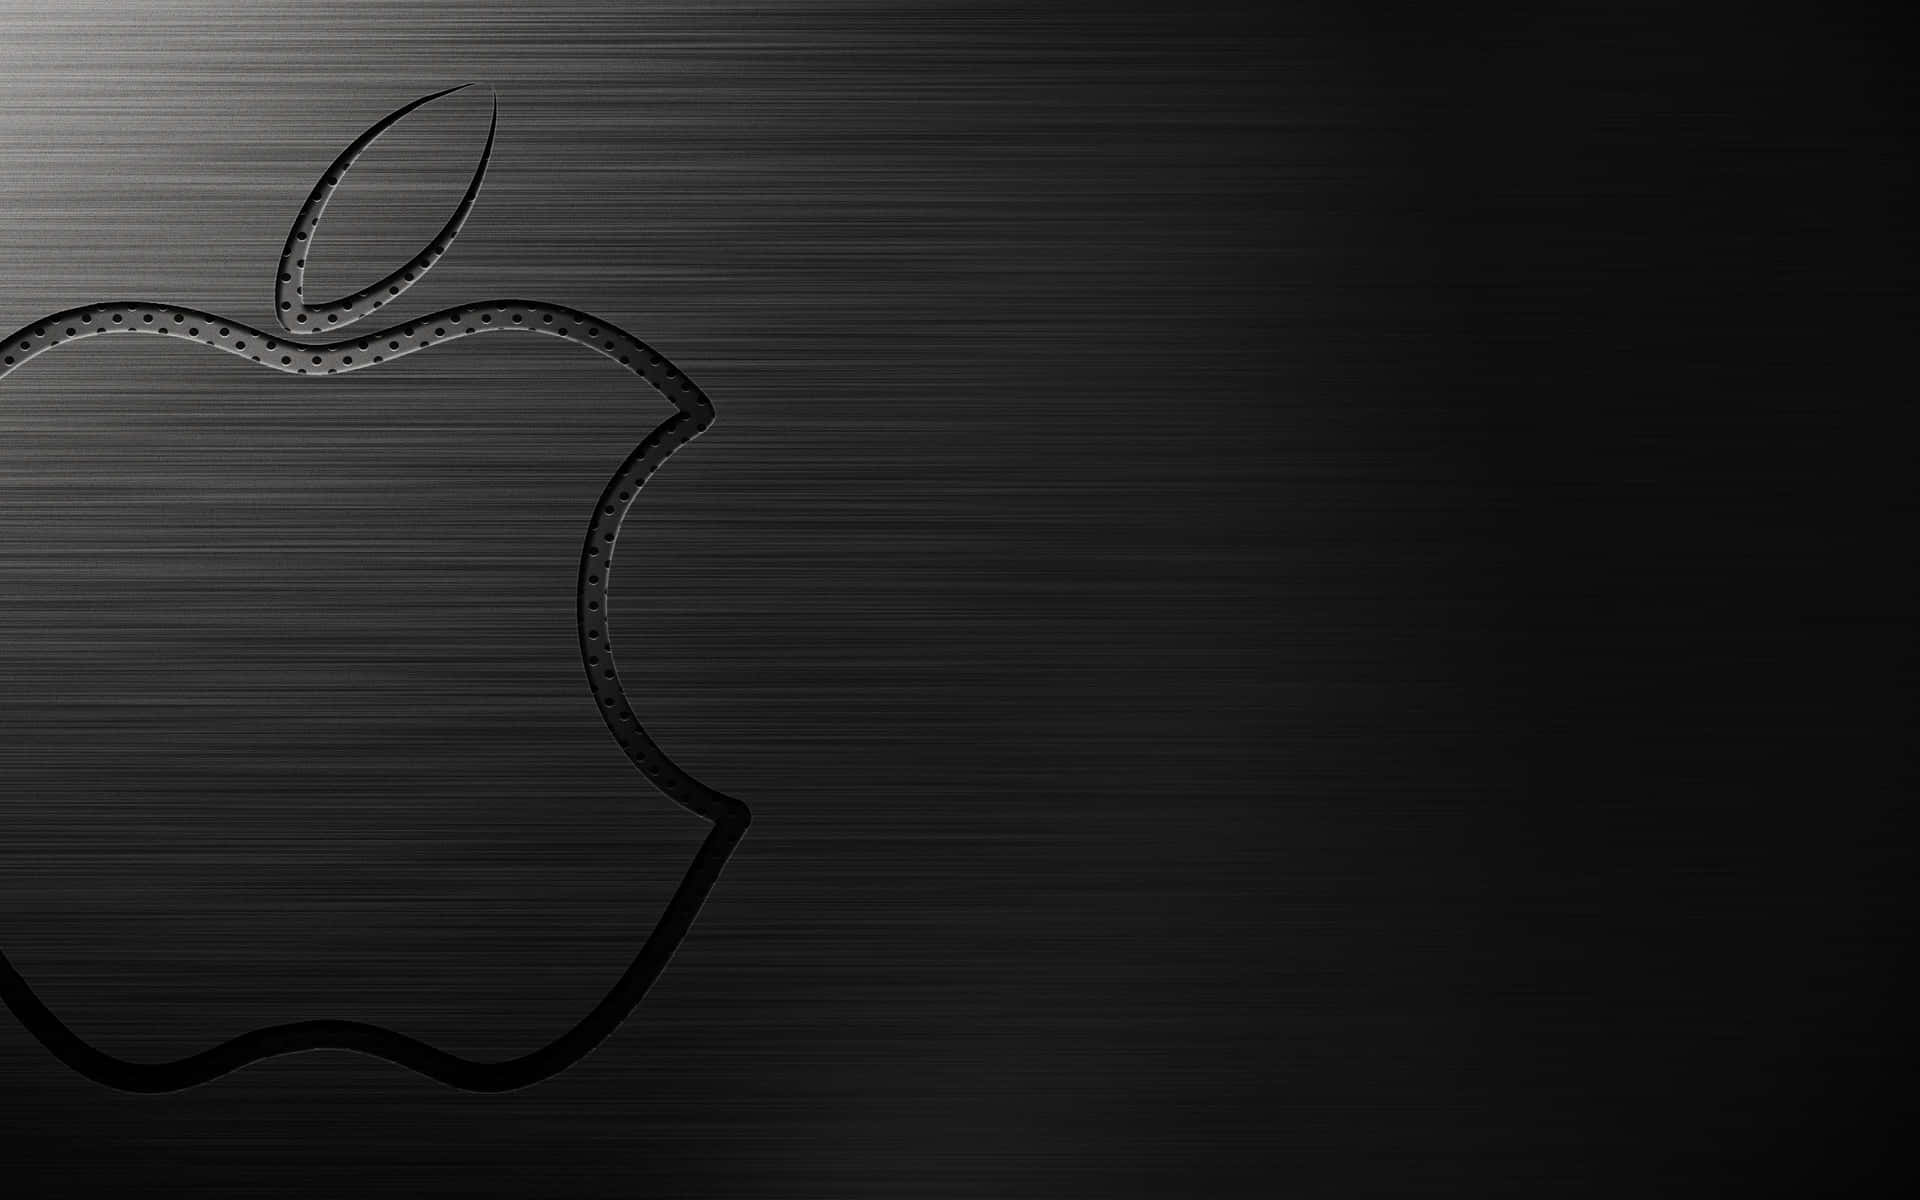 "Get ready to take productivity to another level with the sleek and powerful Black Macbook." Wallpaper